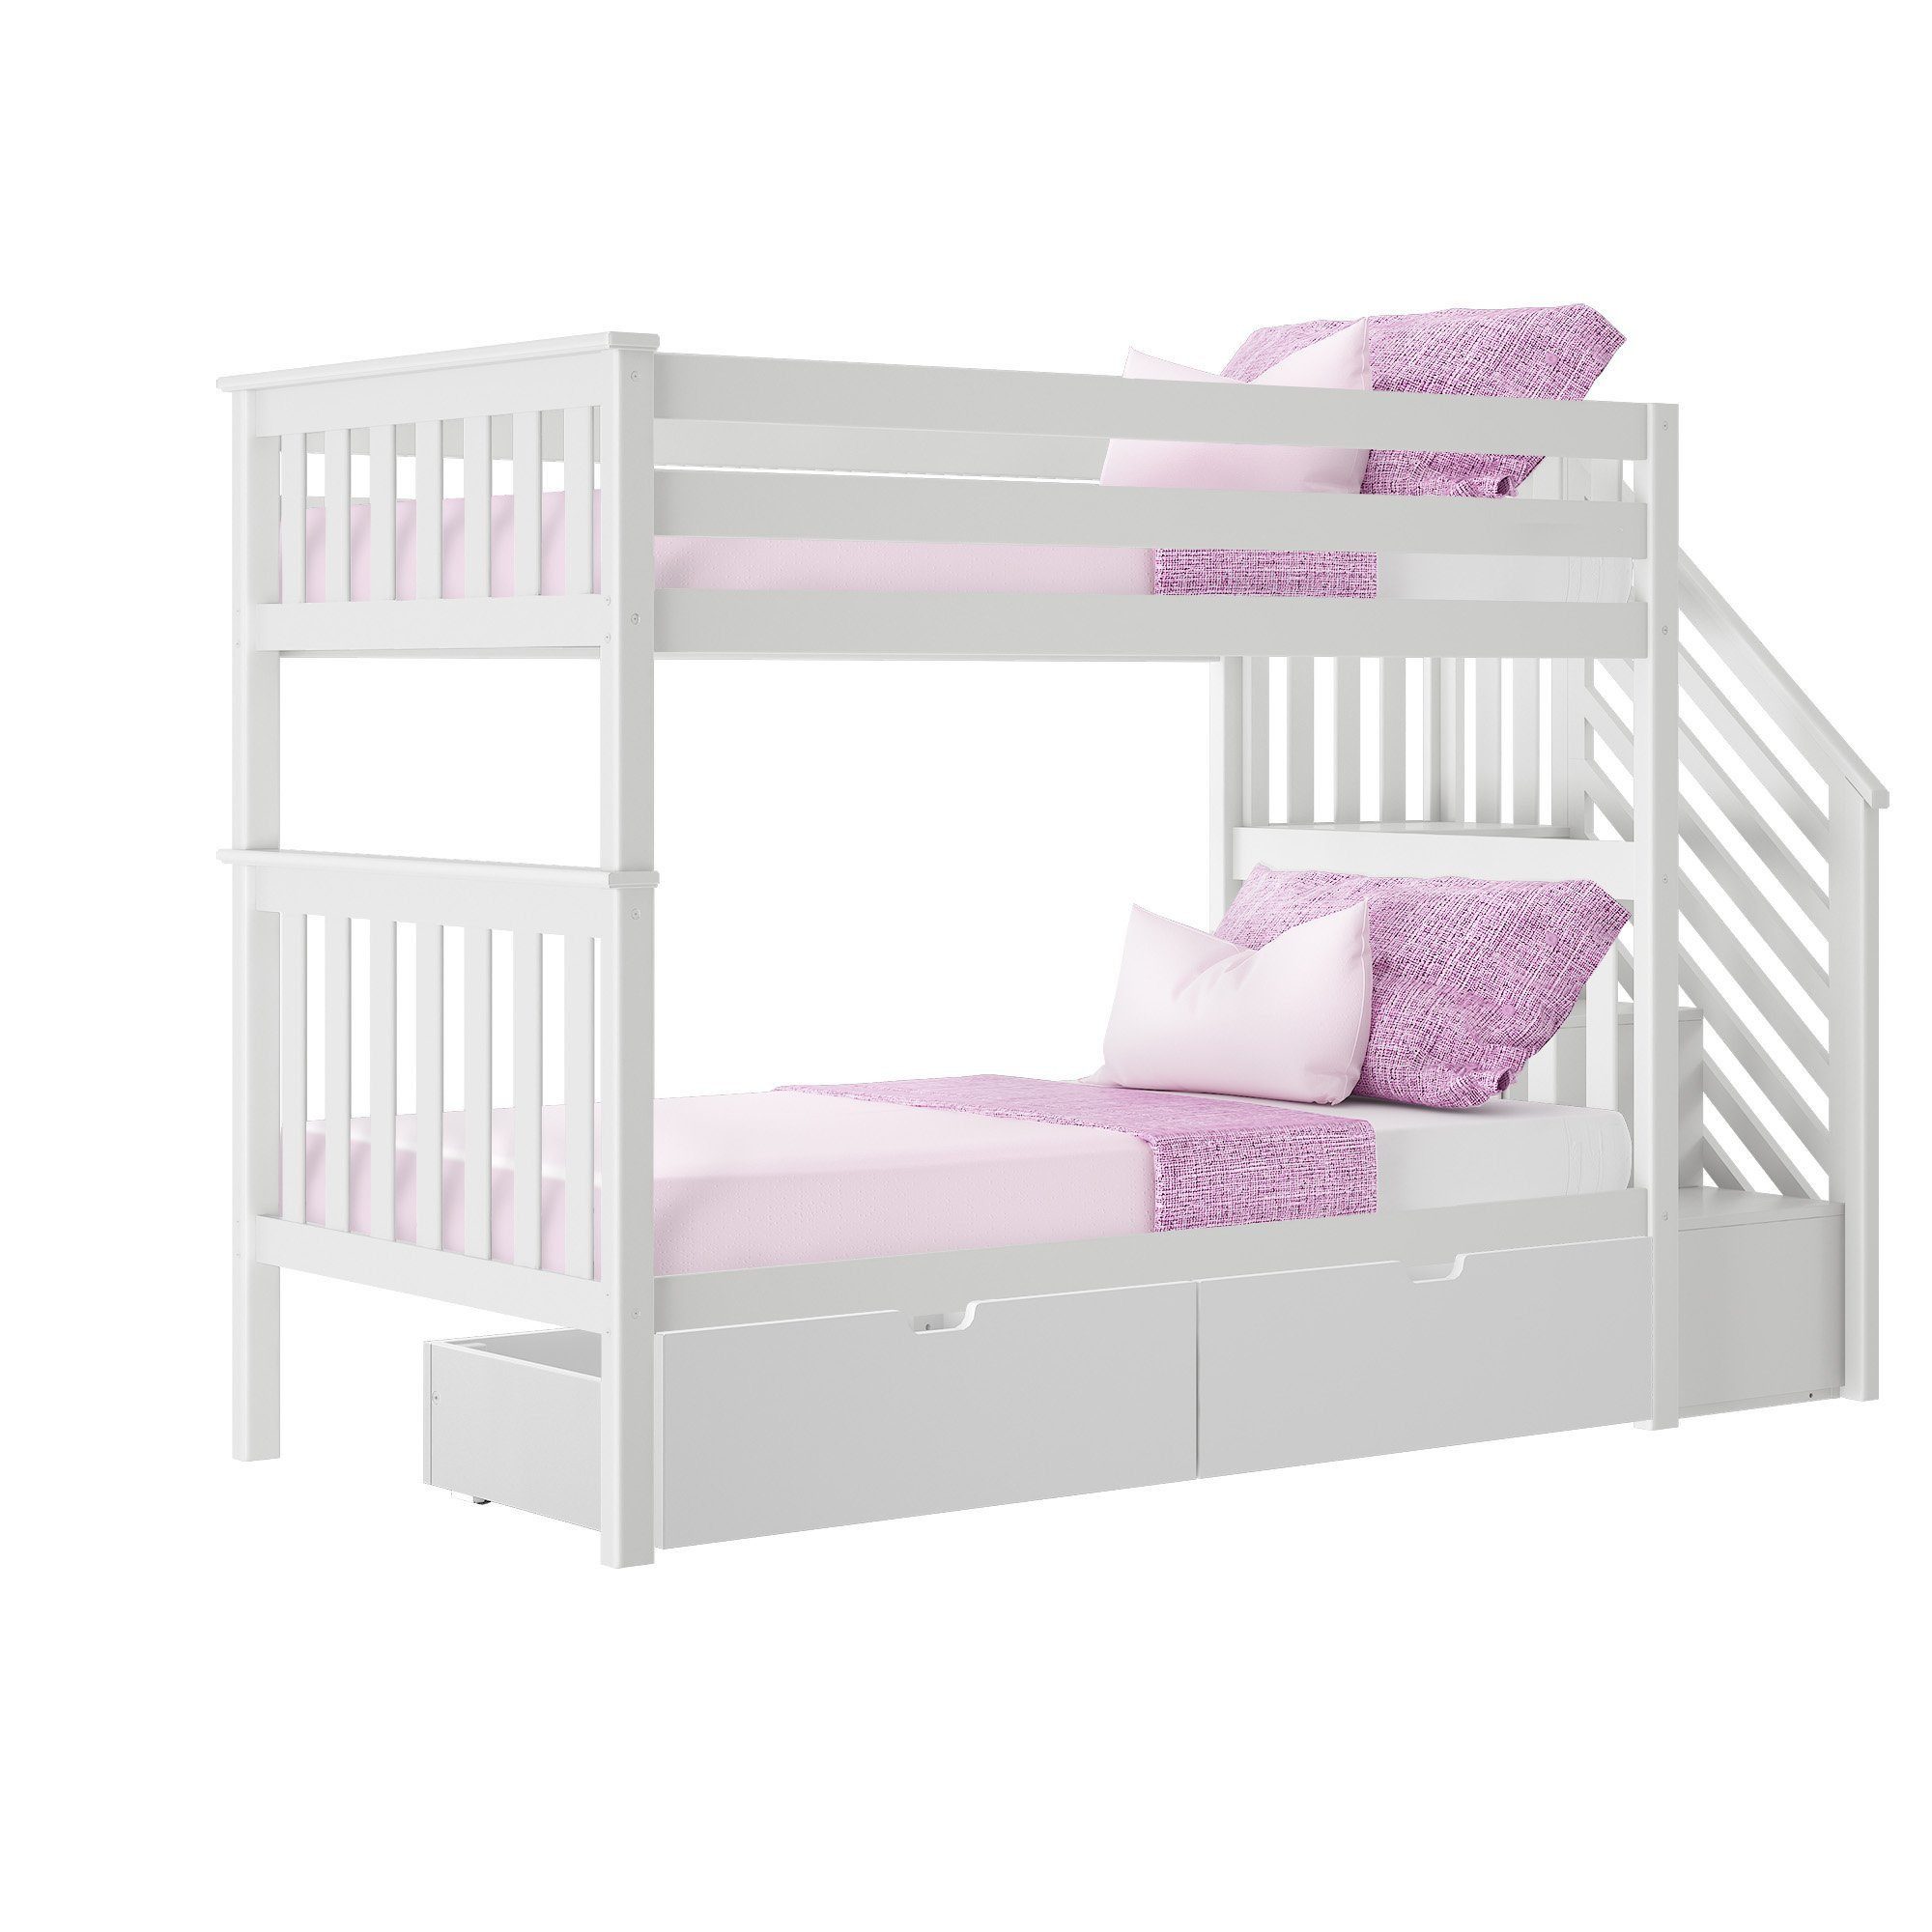 MAX & LILY SOLID WOOD TWIN OVER TWIN BUNK BED WITH STAIRCASE IN GREY FINISH